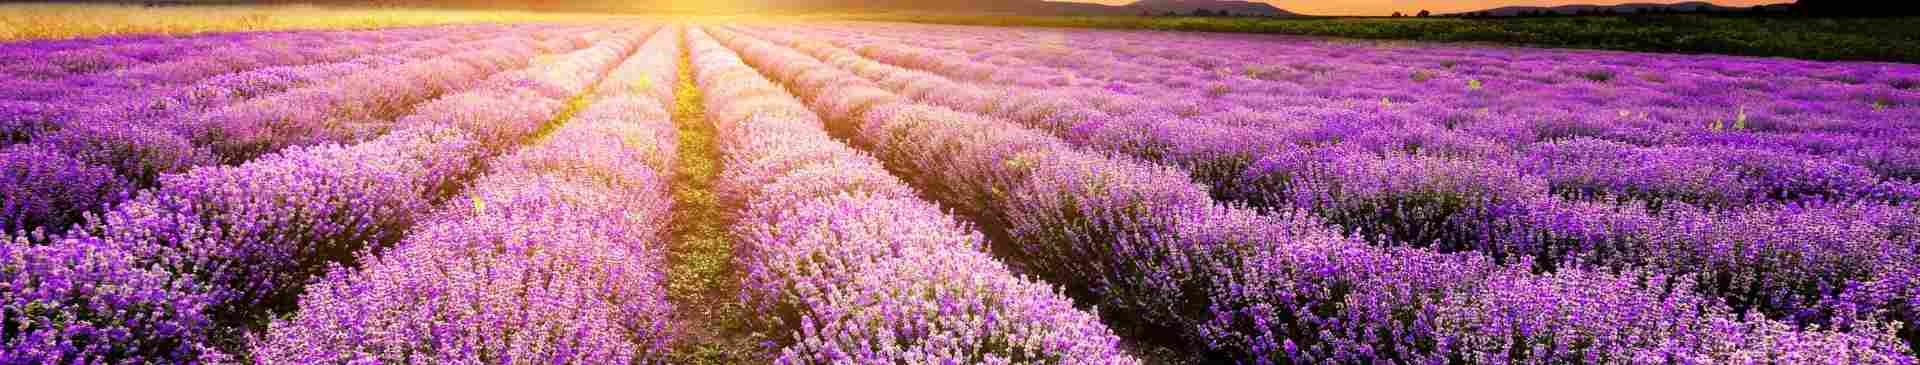 6 Ways to Utilise the Lavender in Your Garden